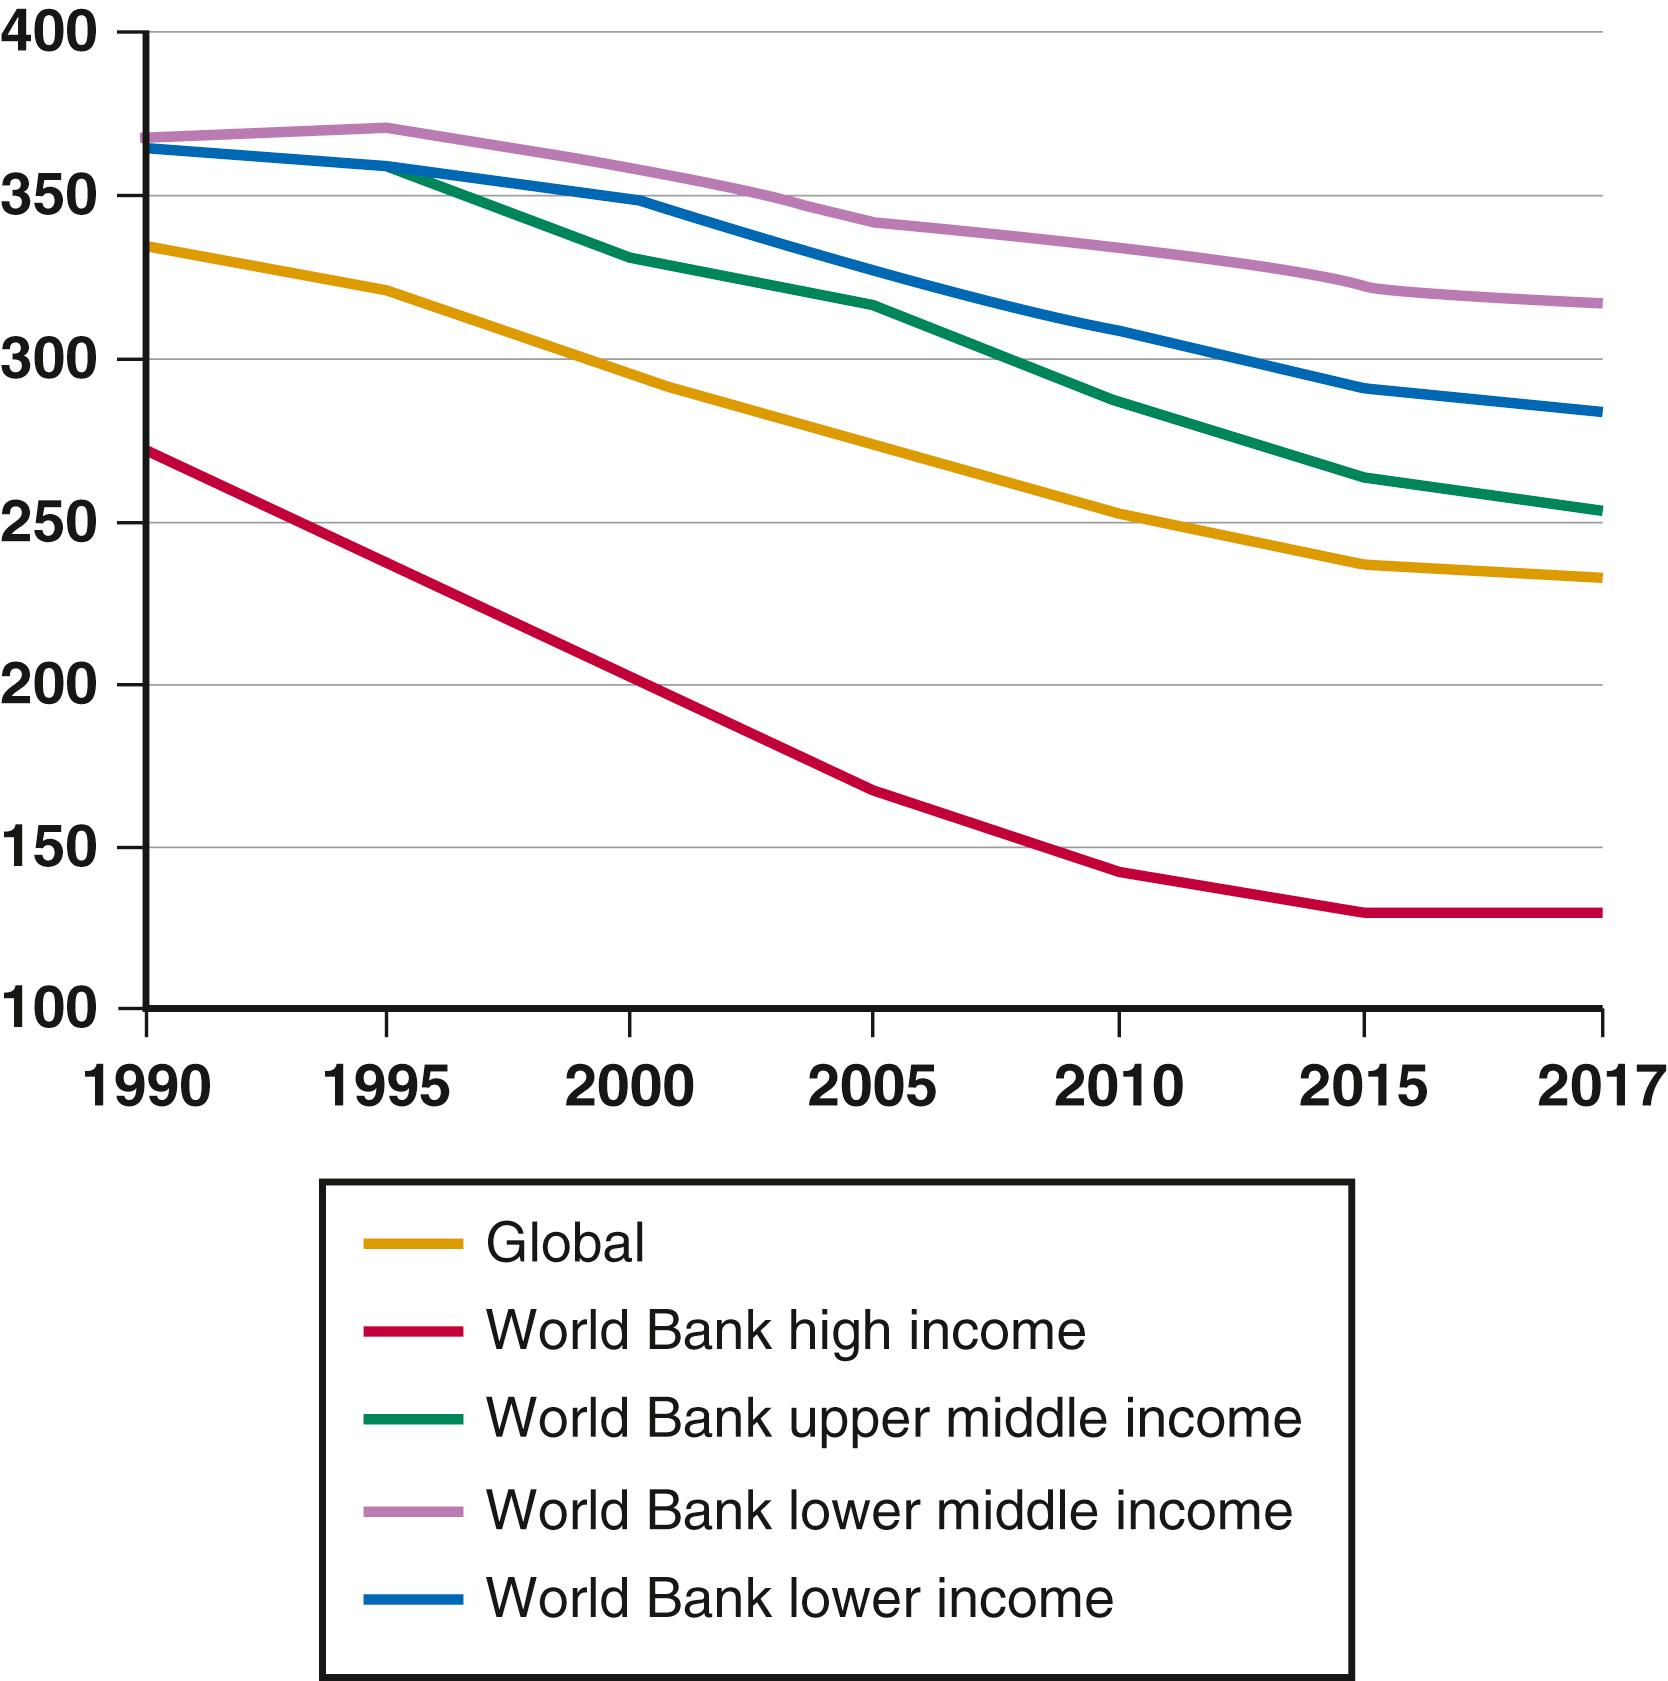 FIGURE 2.4, Cardiovascular disease death rates per 100,000 population from 1990 to 2017, by World Bank income categories.